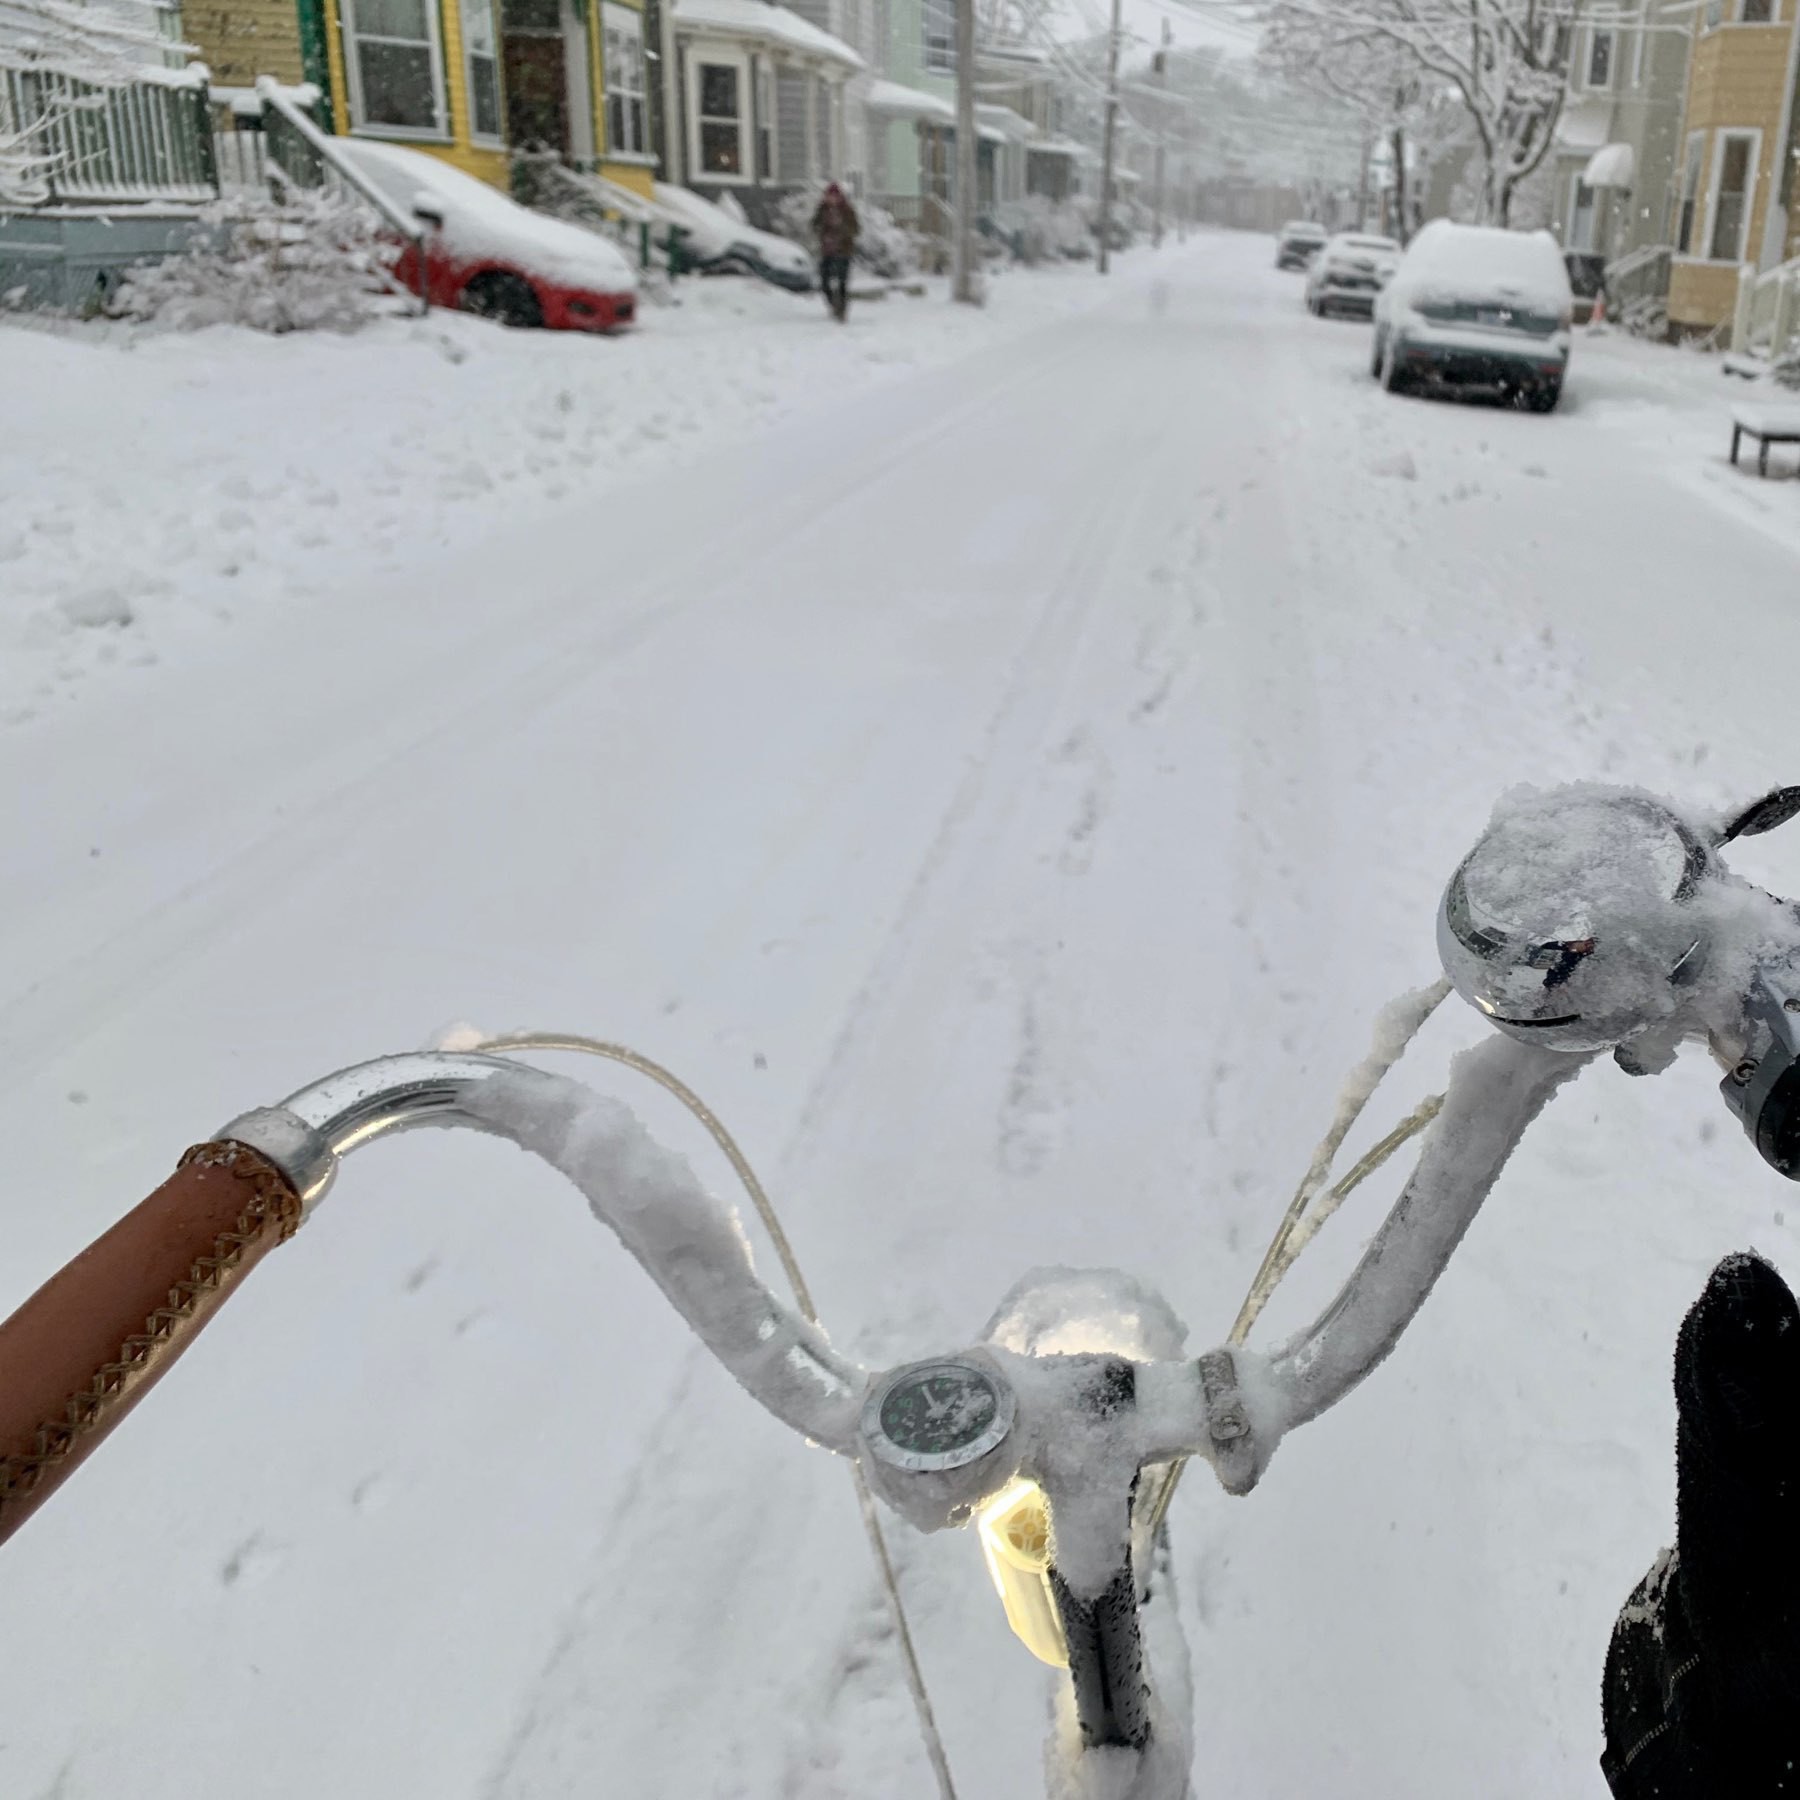 View of a snowy sidestreet from a bicycle-rider's perpective